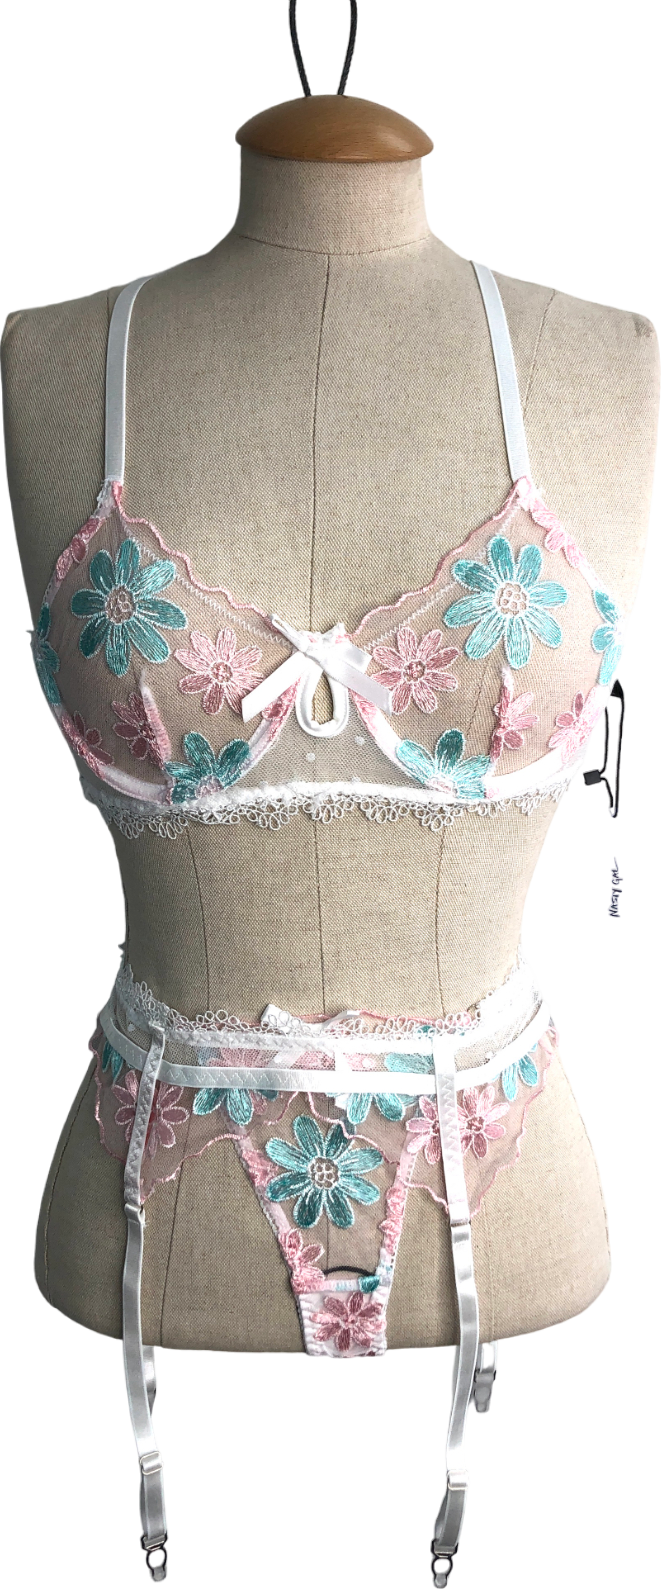 Nasty Gal White Floral Embroidered Scallop Underwire 3pc Lingerie Set UK 8